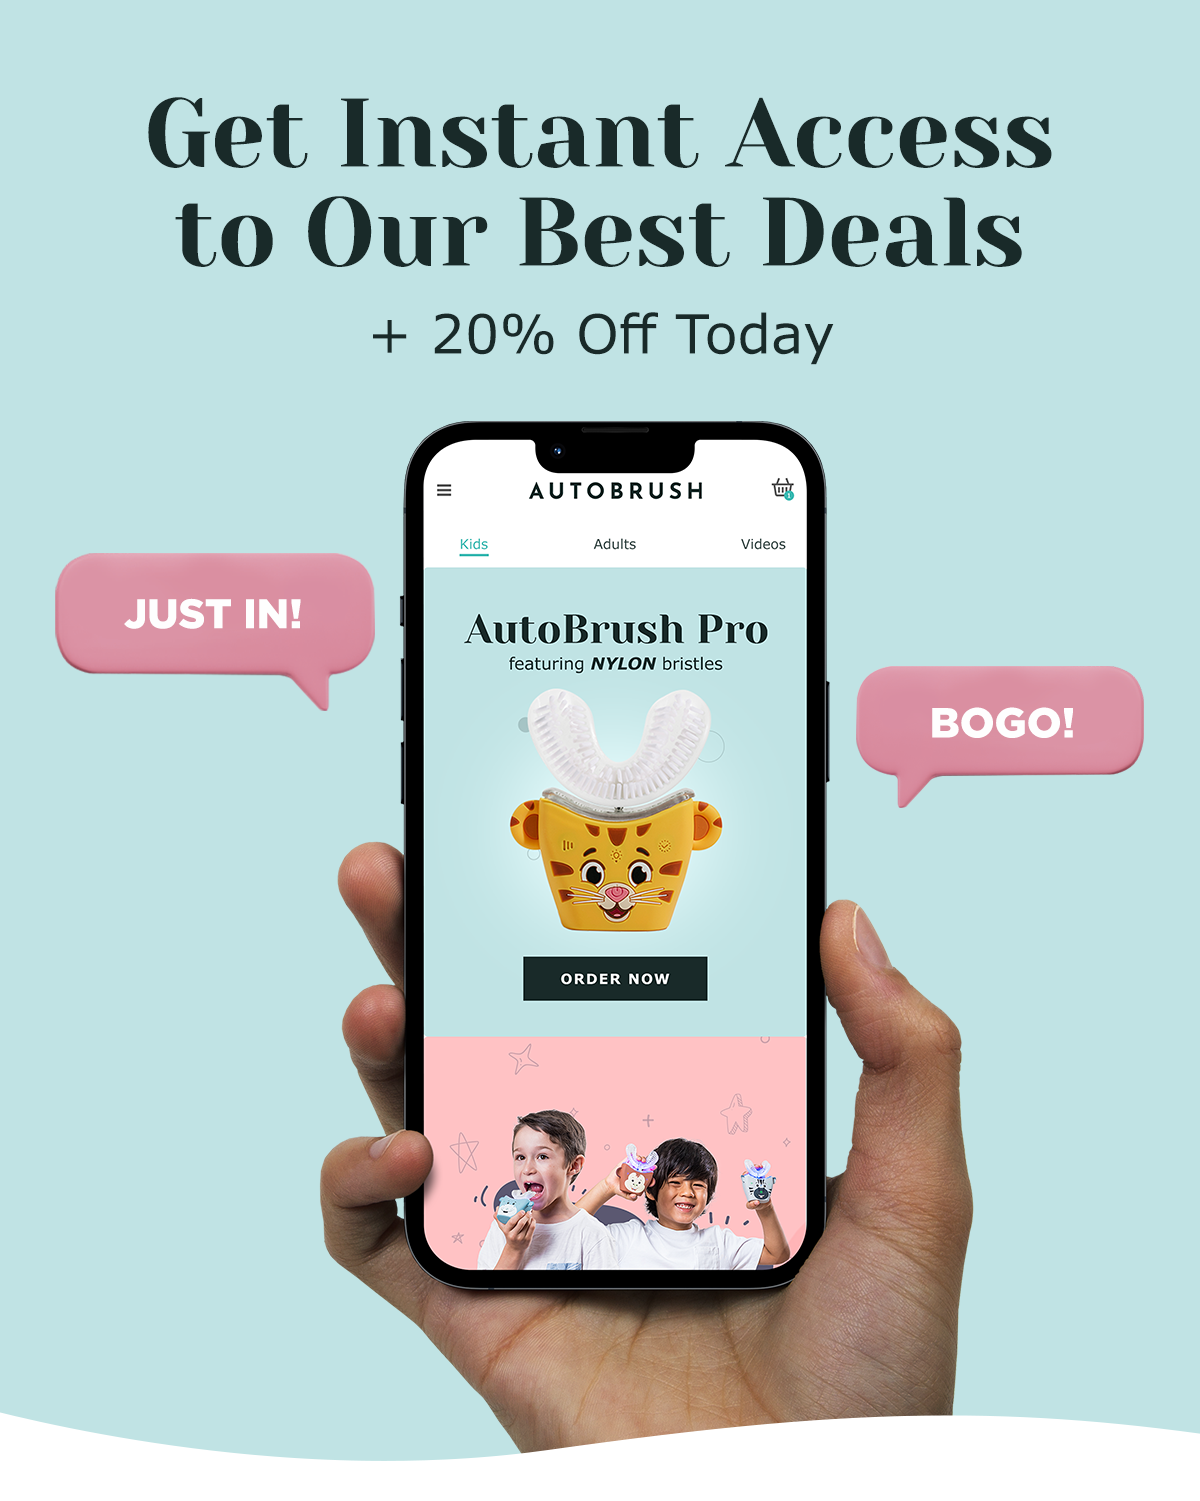  Get Instant Access to Our Best Deals